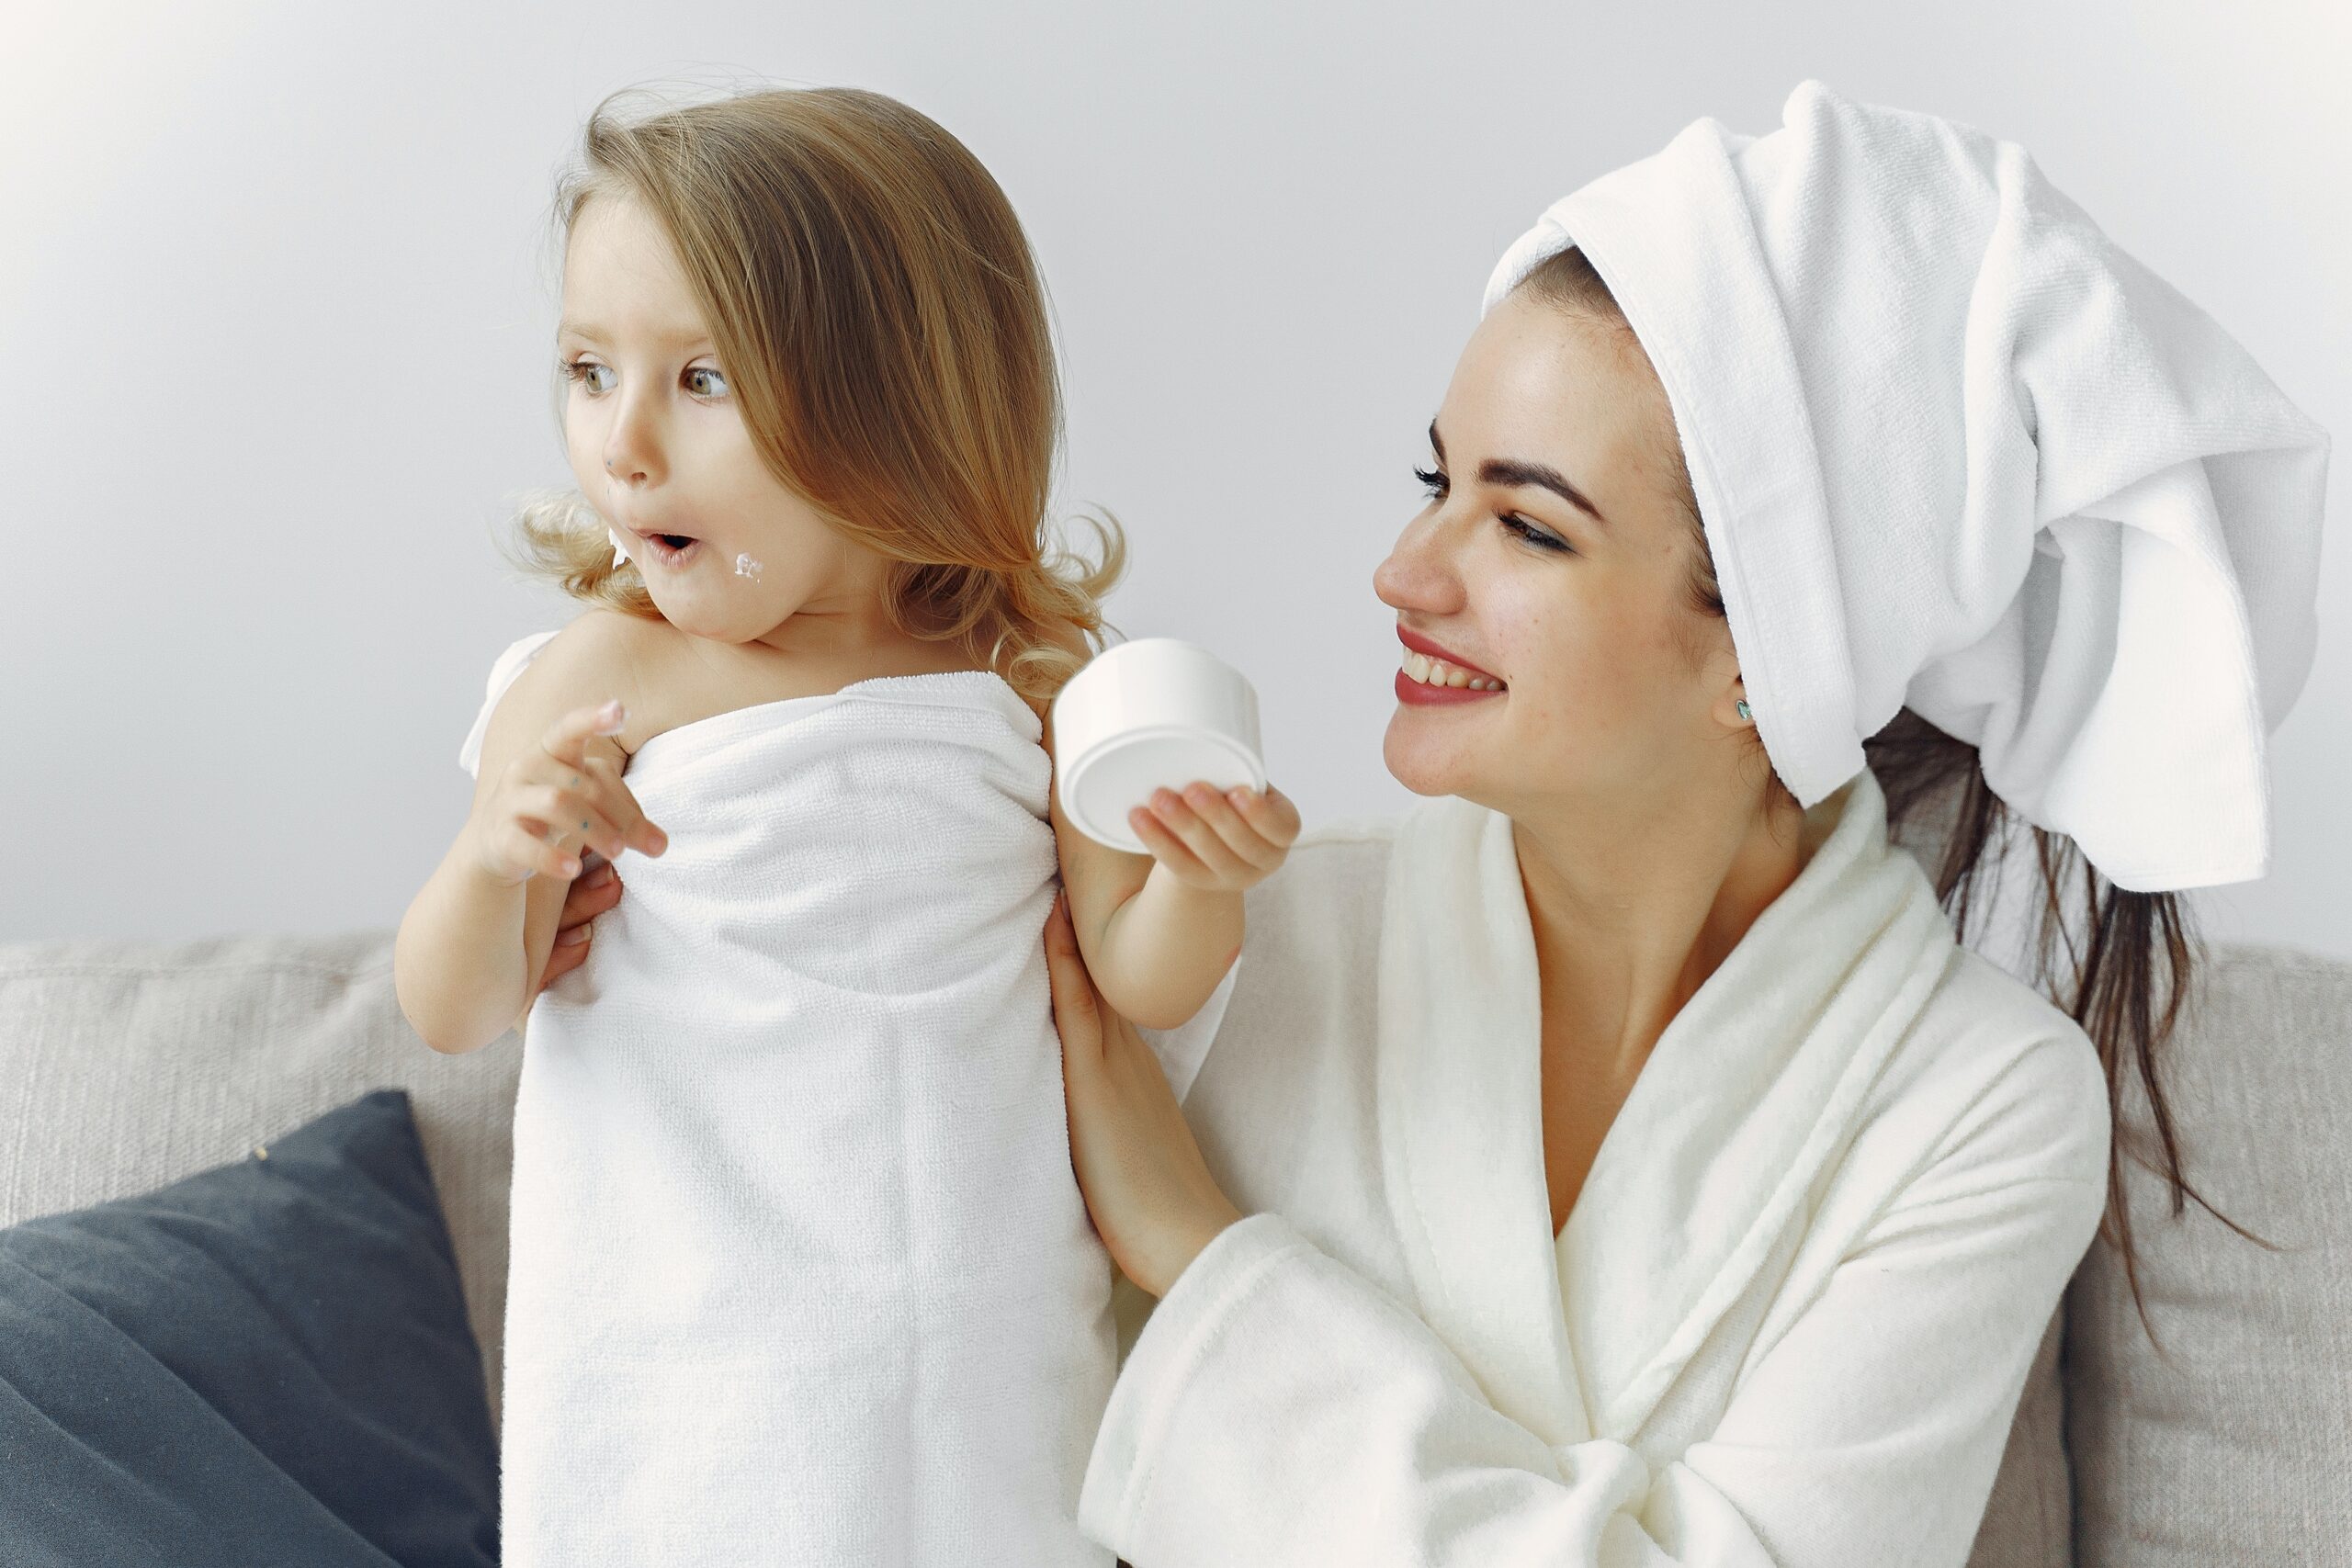 Mother and young daughter in robes and towels after a bath.